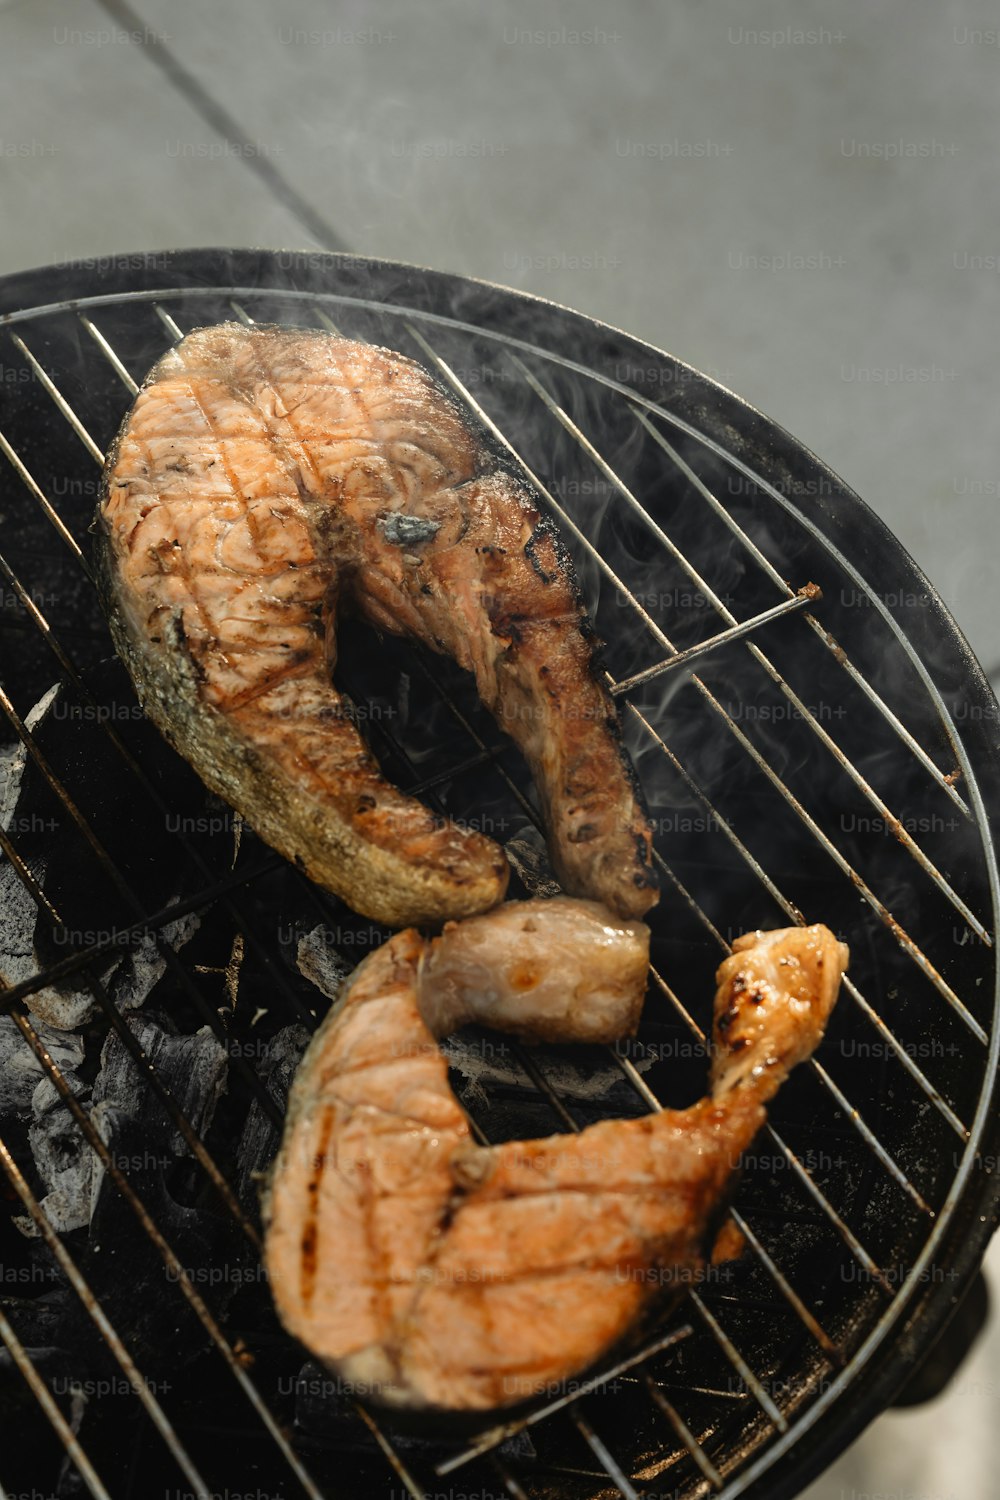 a close up of food on a grill